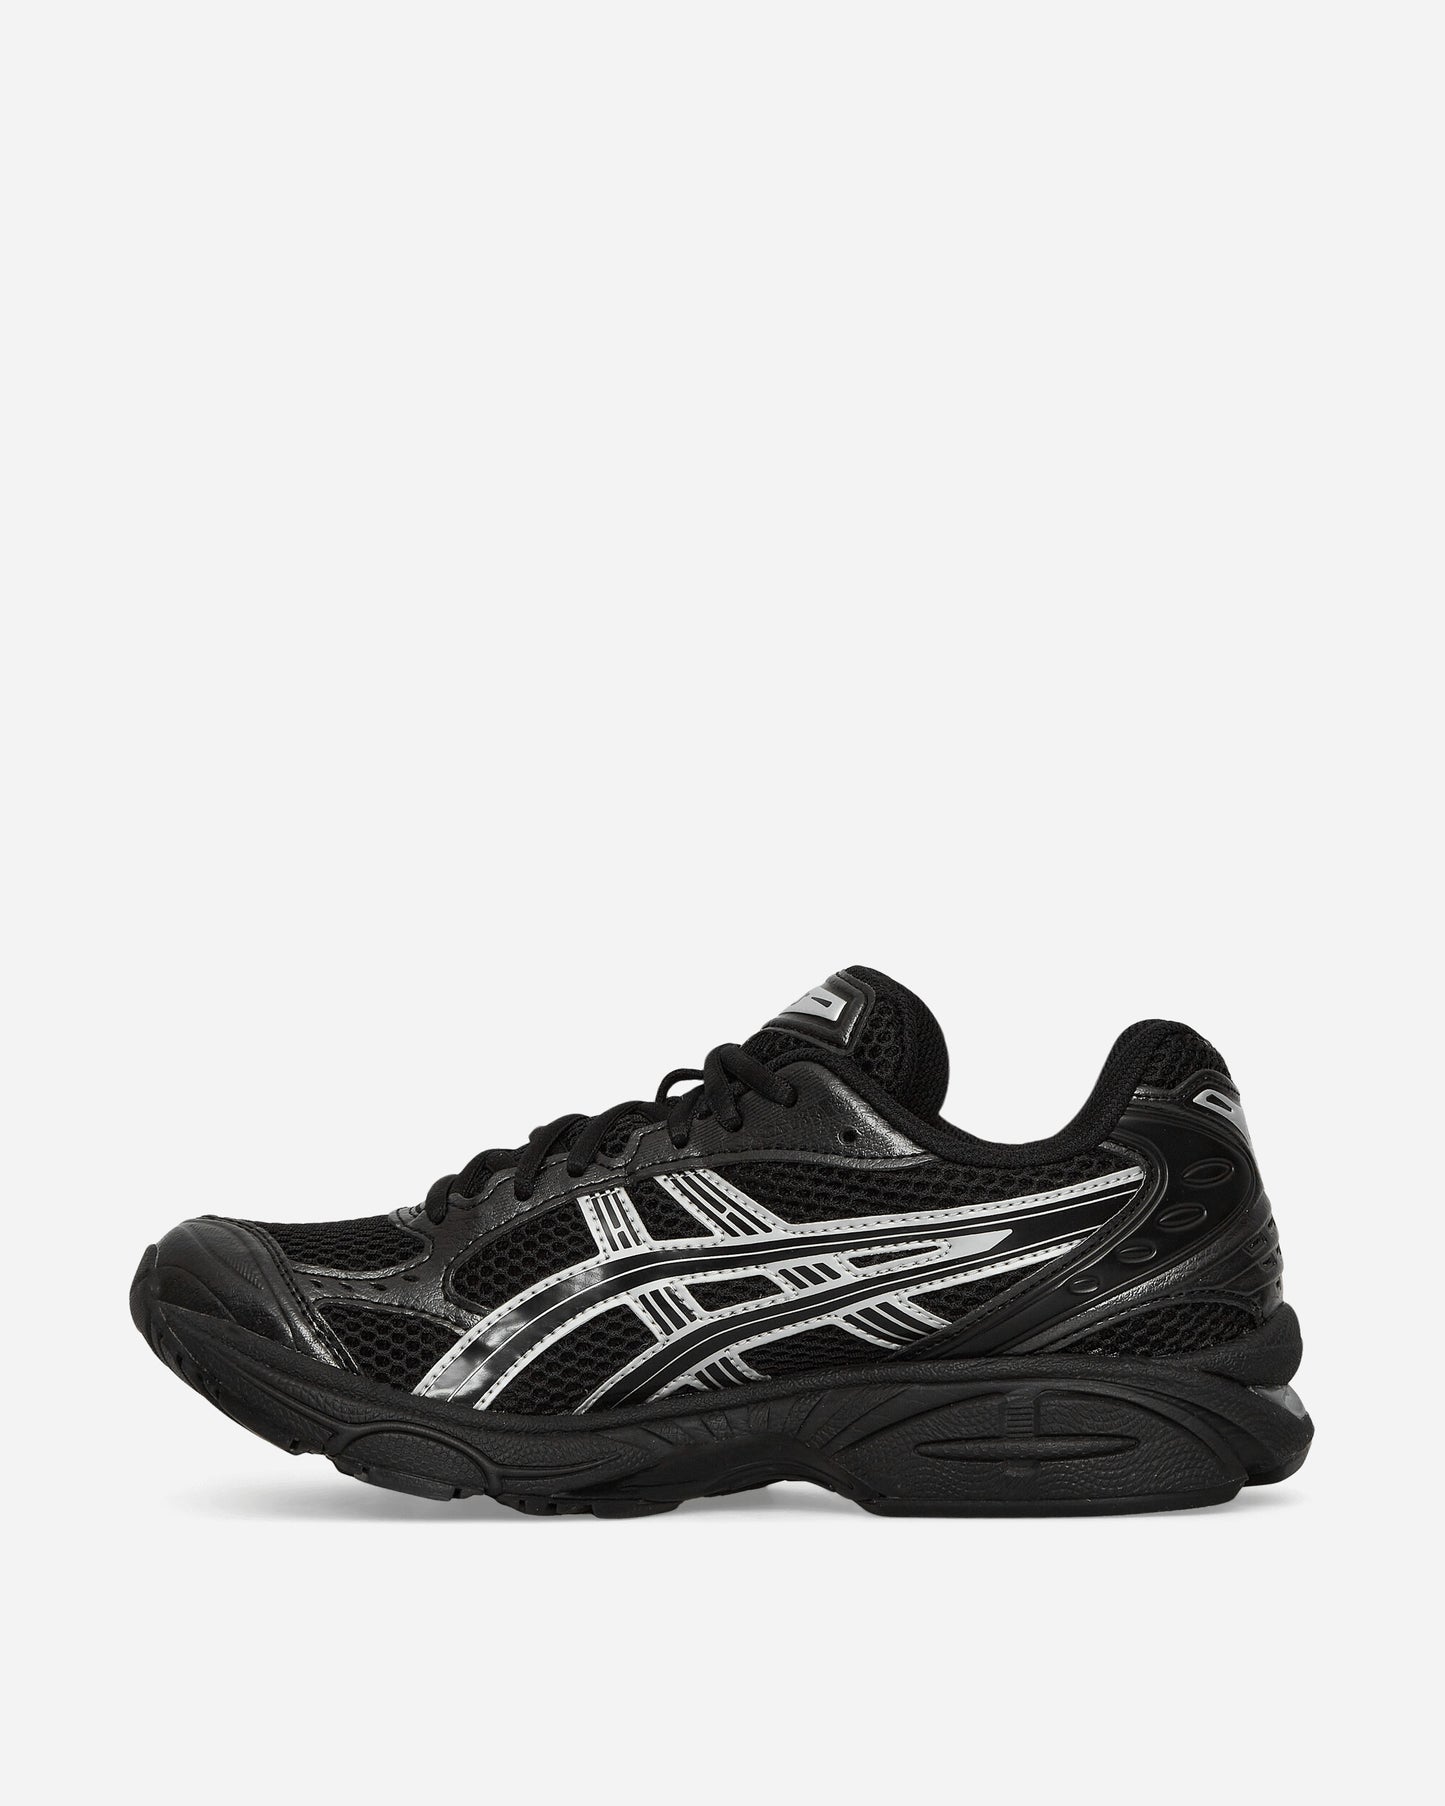 Asics Gel-Kayano 14 Black/Pure Silver Sneakers Low 1201A019-006